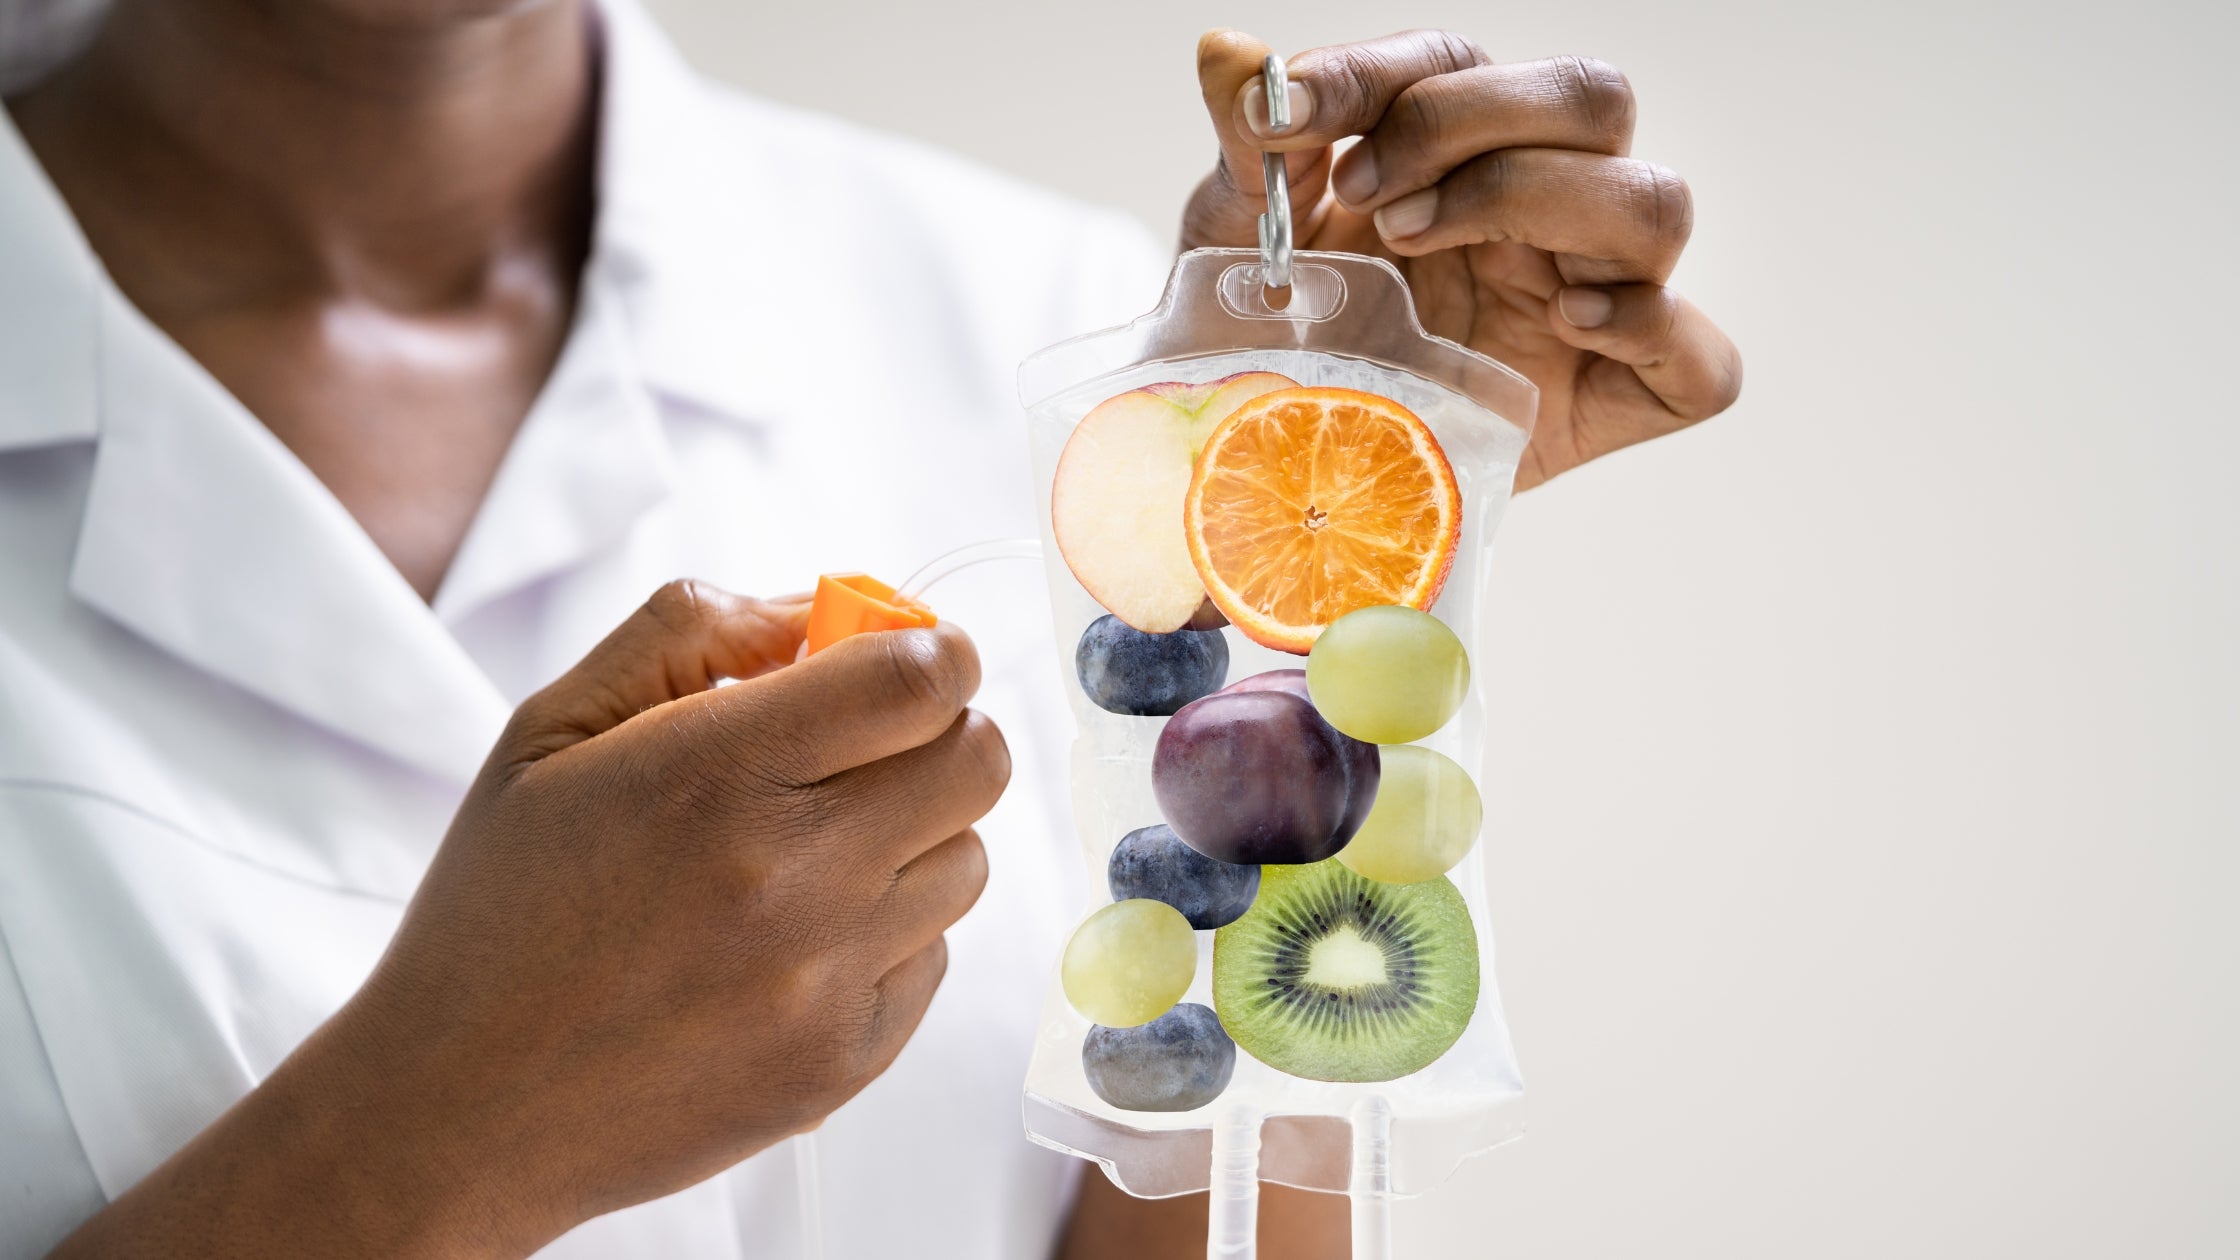 Unpacking the Pros and Cons of Vitamin Drips: Are They Good for You? - A South African Perspective